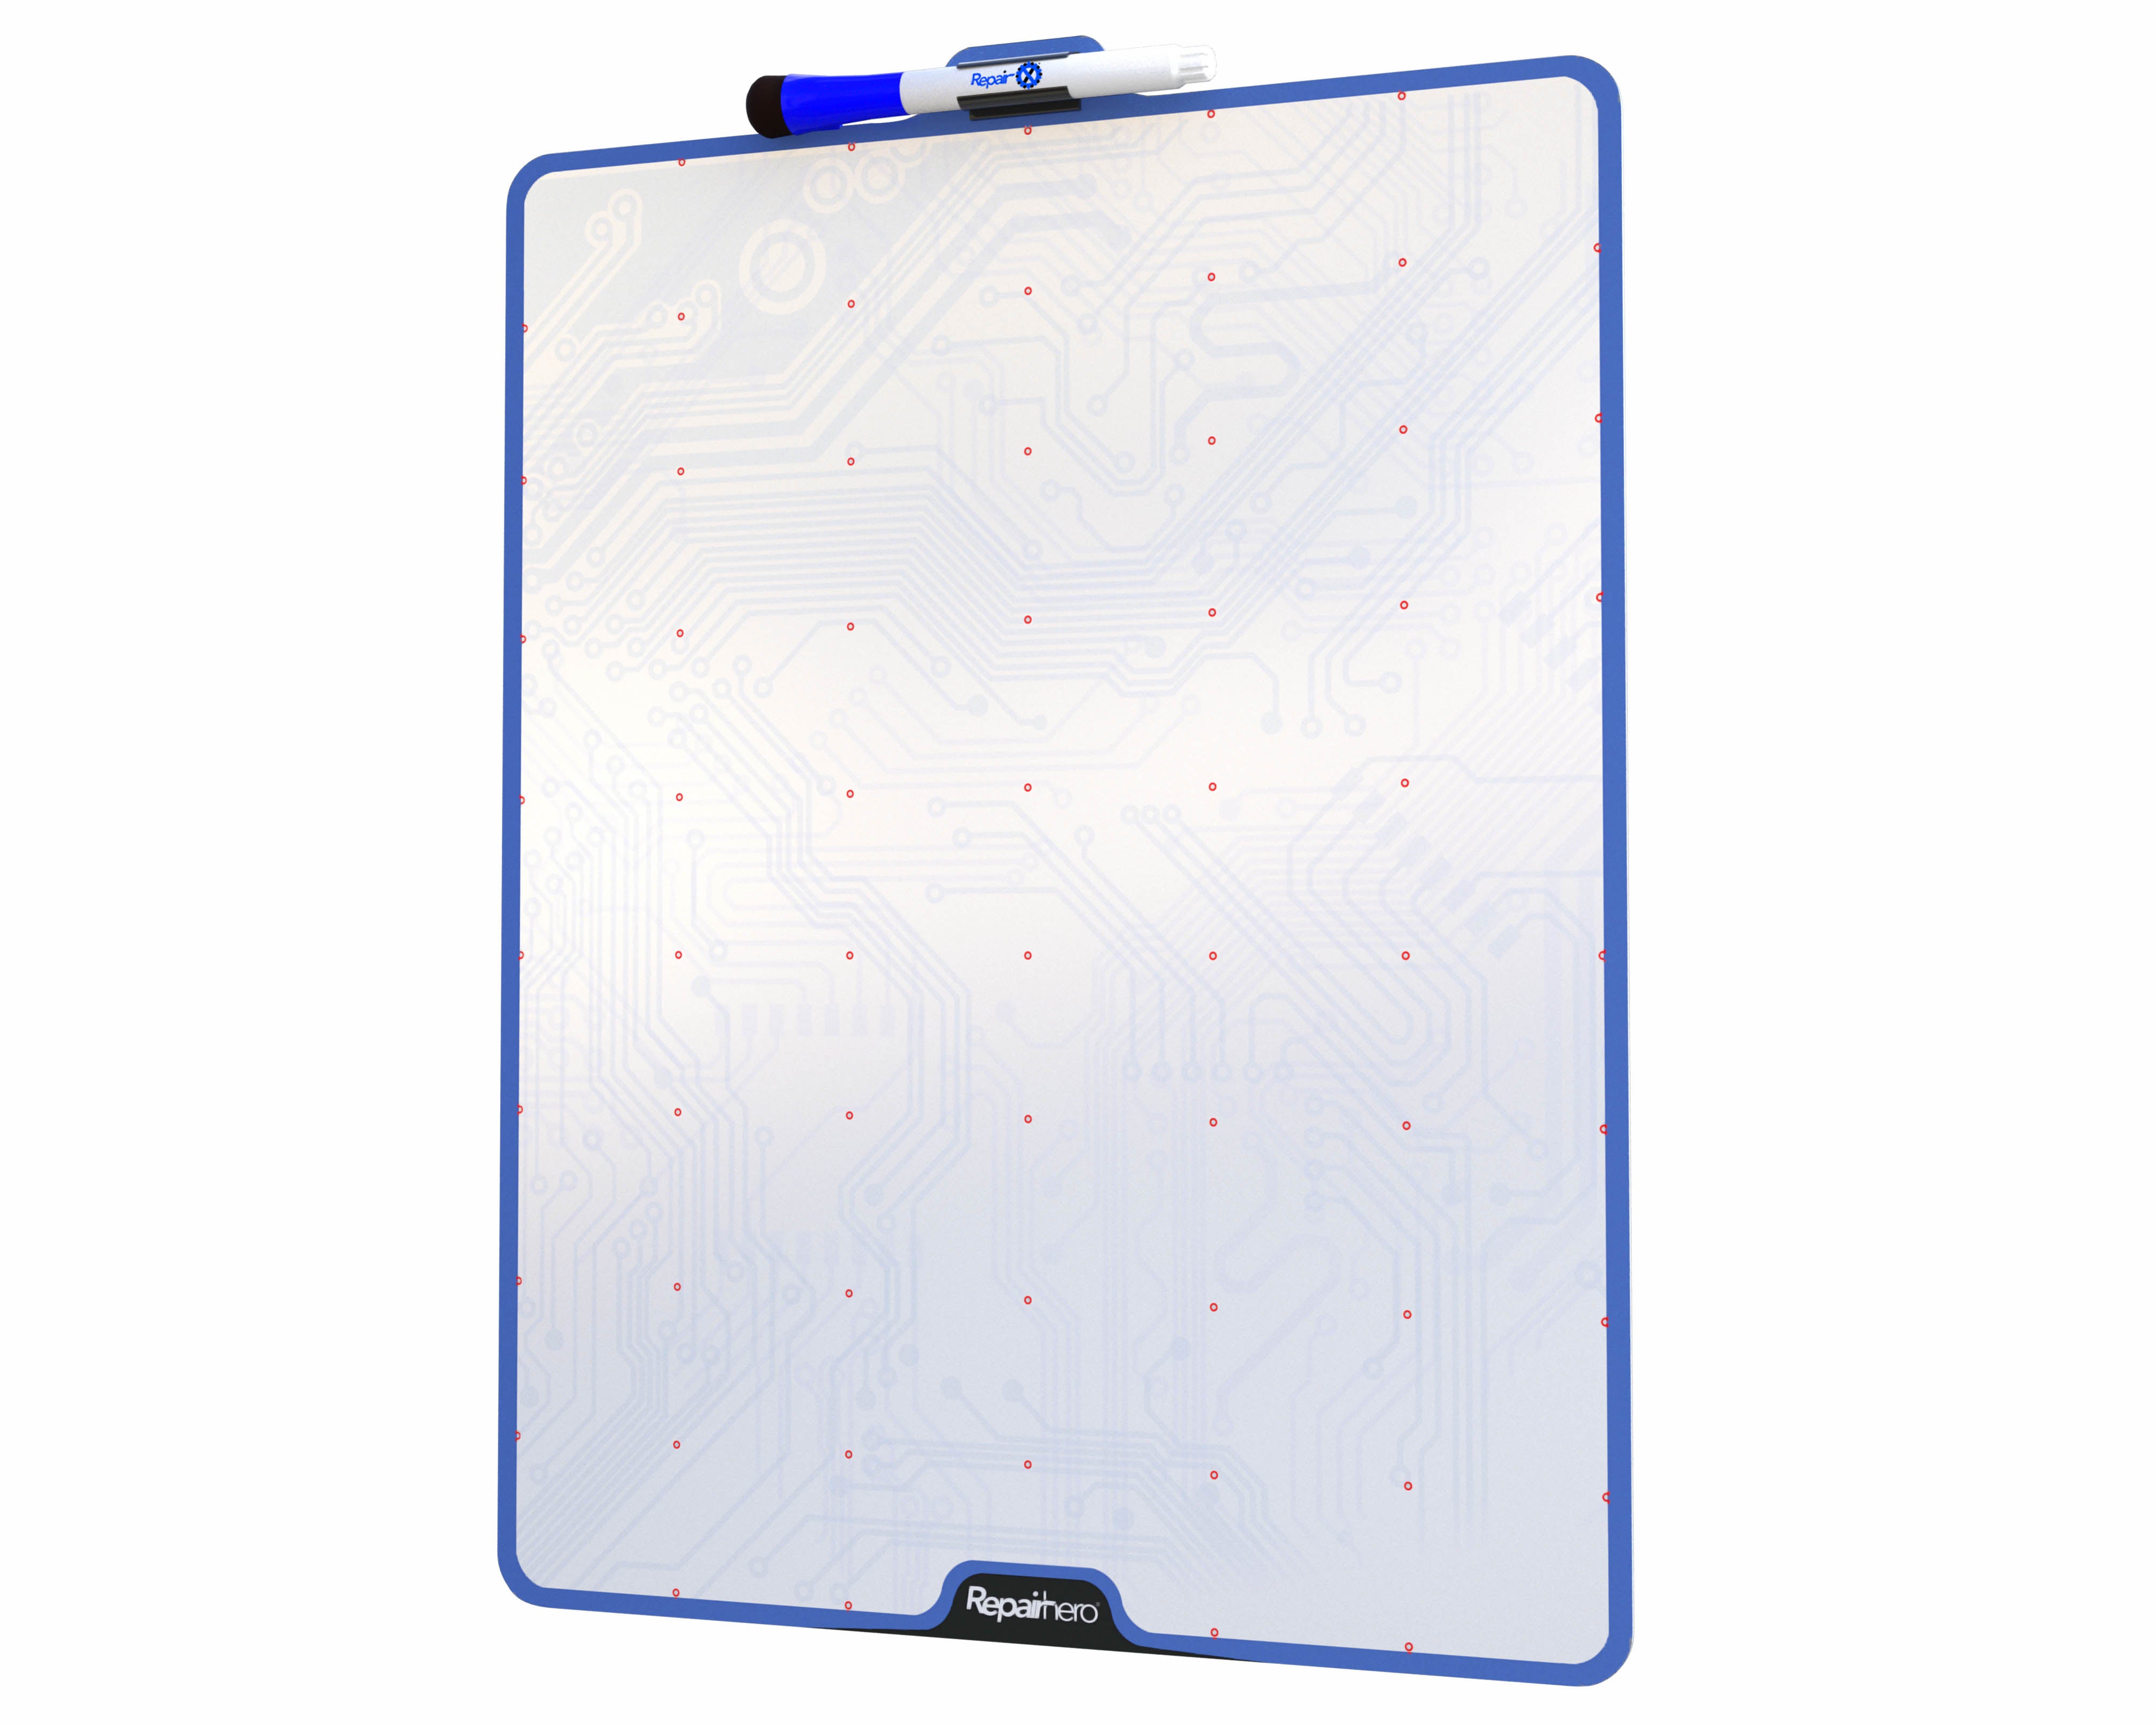 Magnetic Mat, Magnetic Project Mat, Large Size Writing Note Mat with Dry  Erase Pen - Preventing Losing Screws 